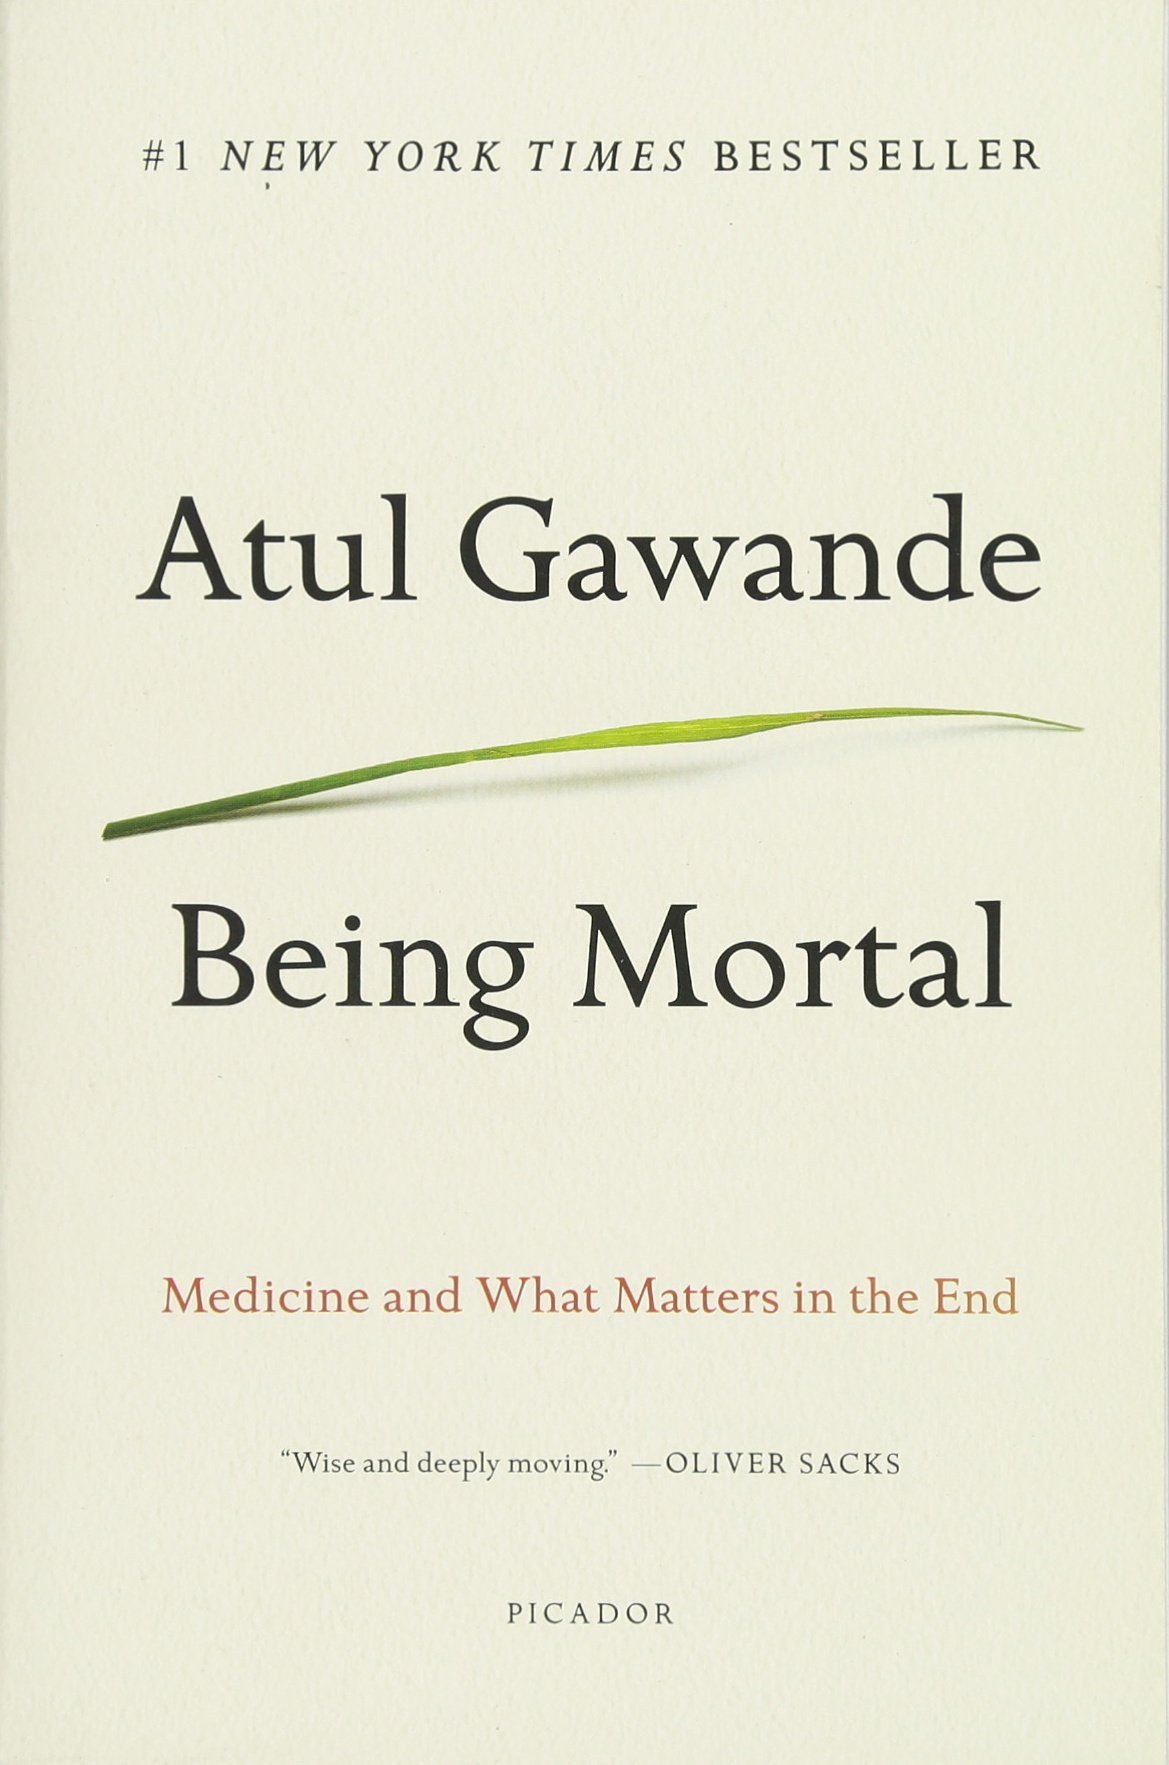 Learn more about the book "Being Mortal: Medicine and What Matters in the End," written by Dr. Atul Gawande, a general and endocrine surgeon.